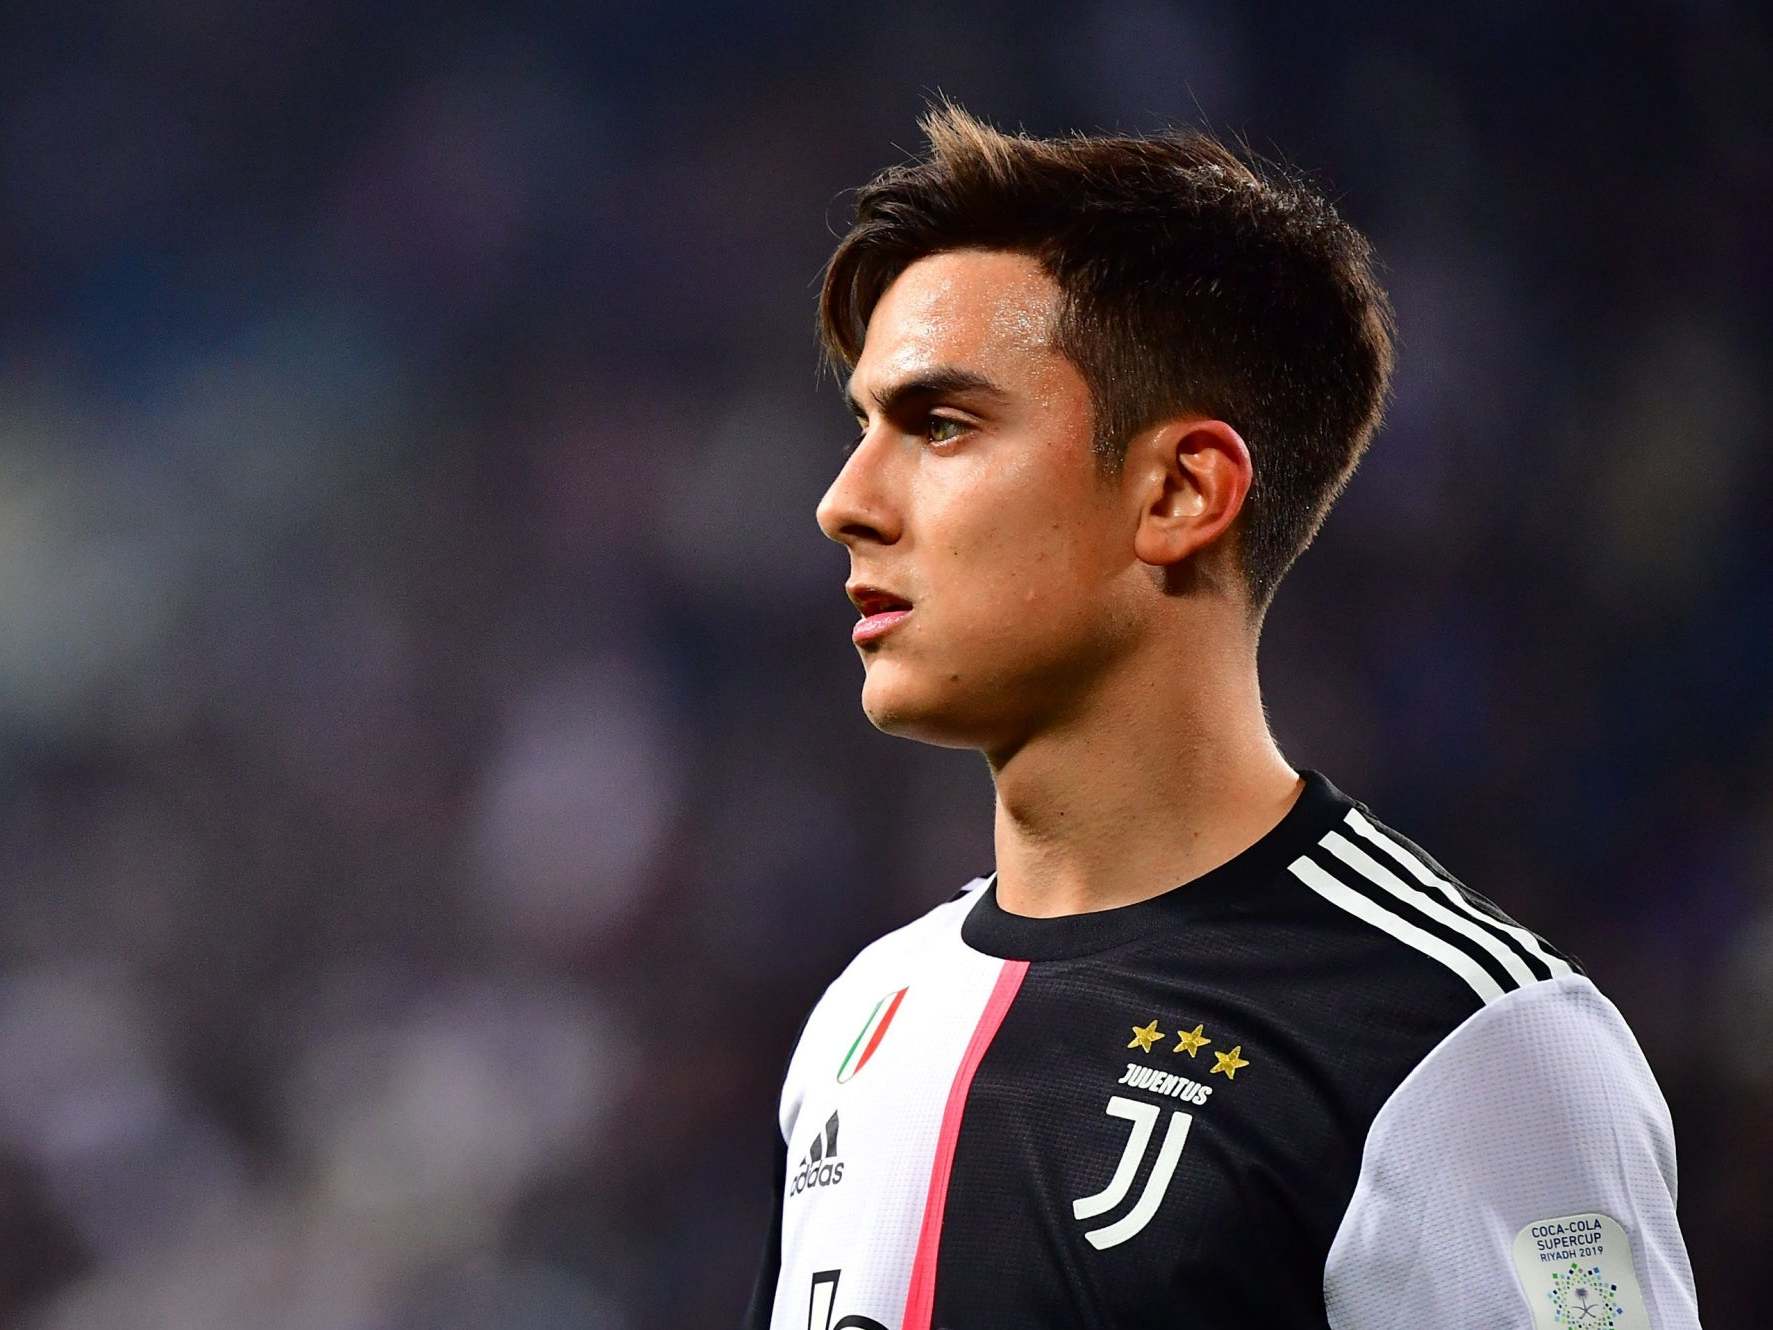 Dybala will be one of the key players for Cagliari to stop